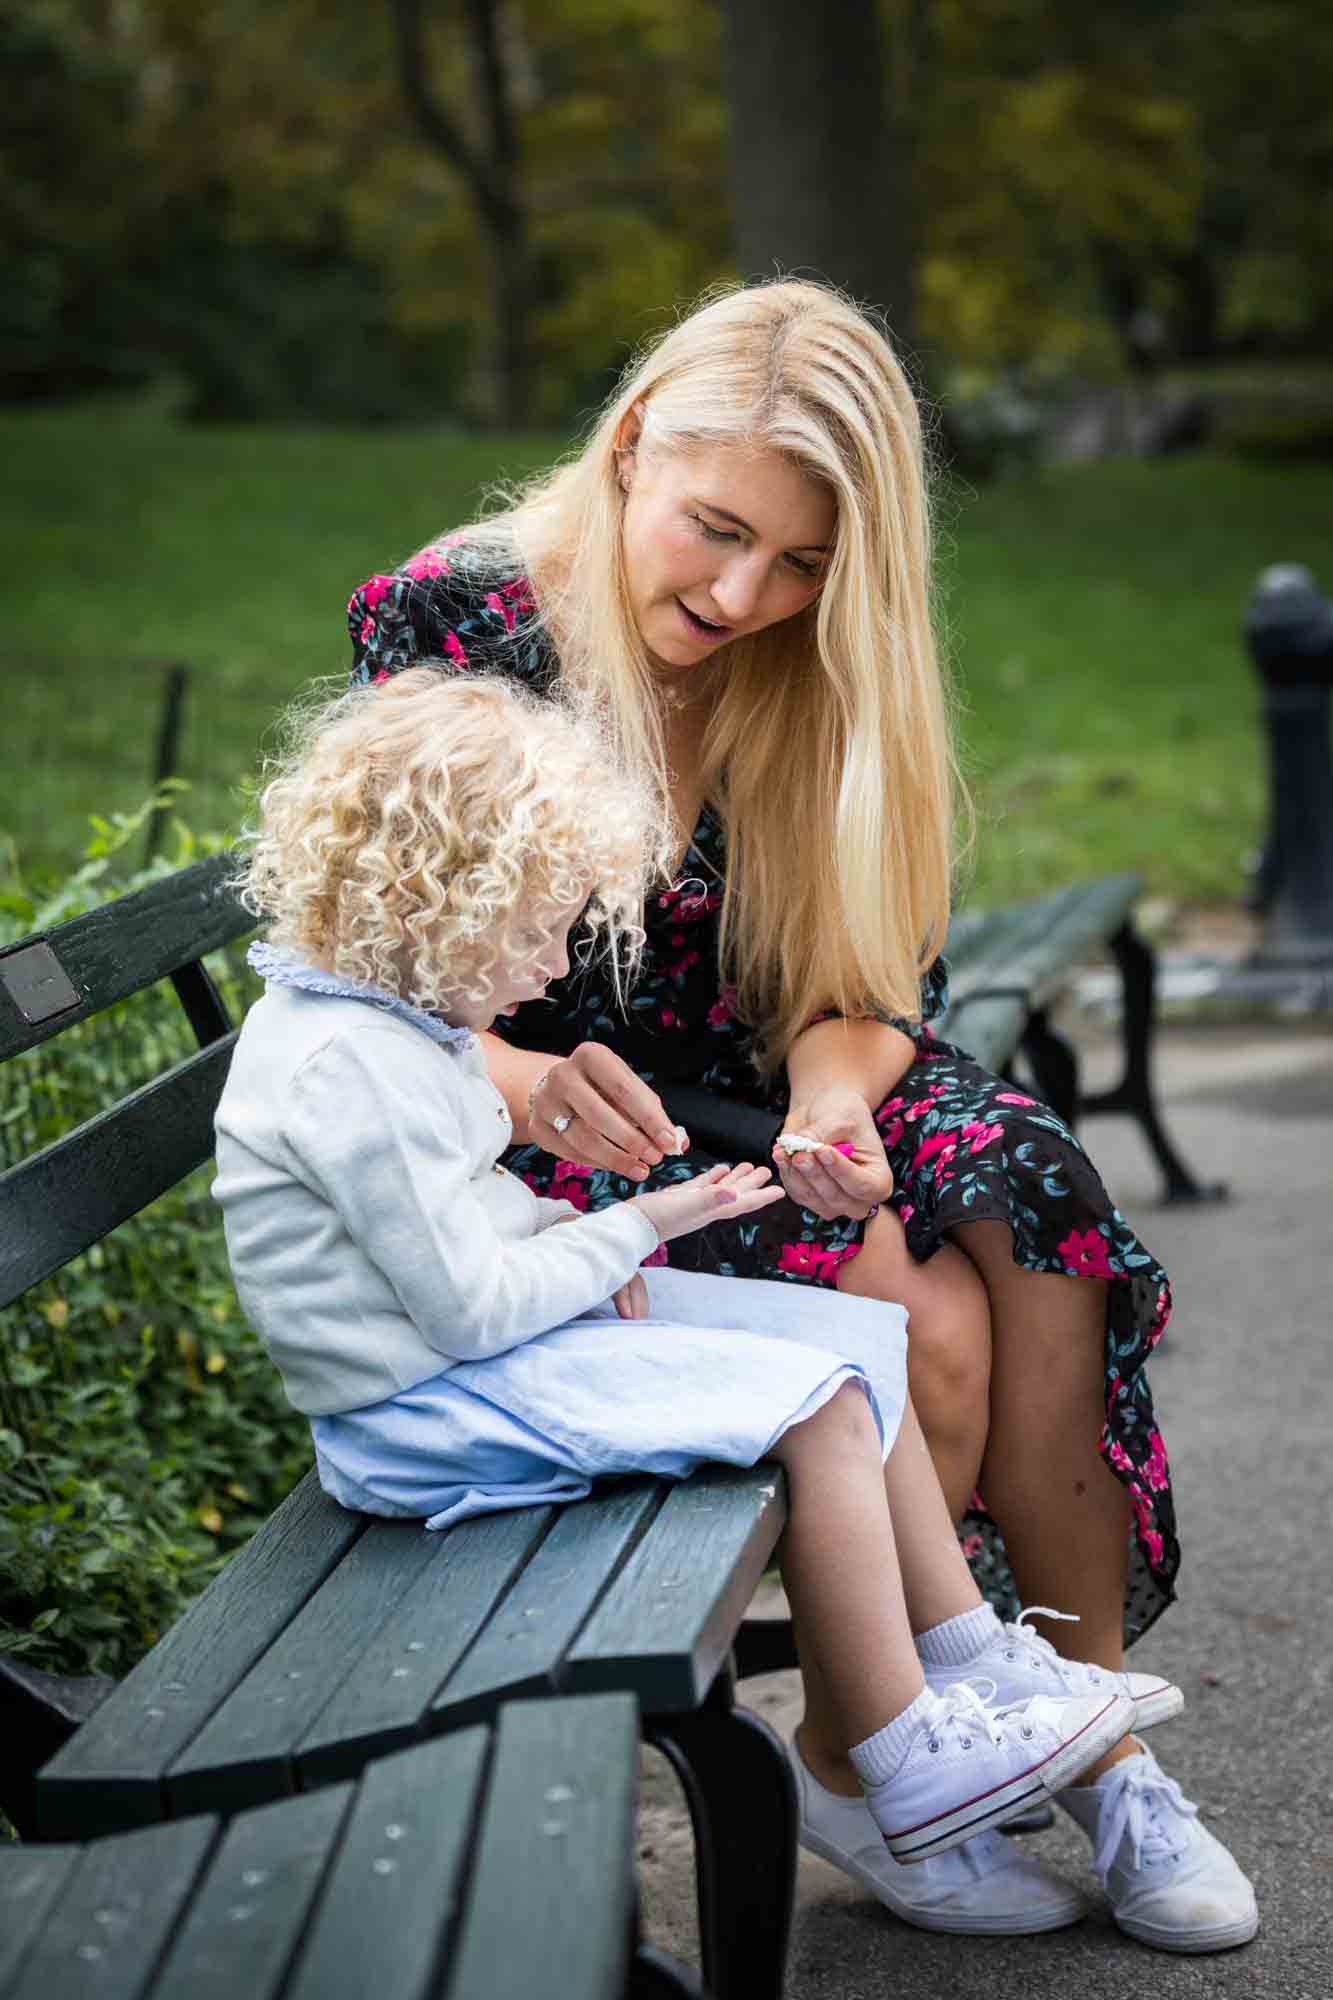 Central Park family portrait of mother and child on bench playing with flower